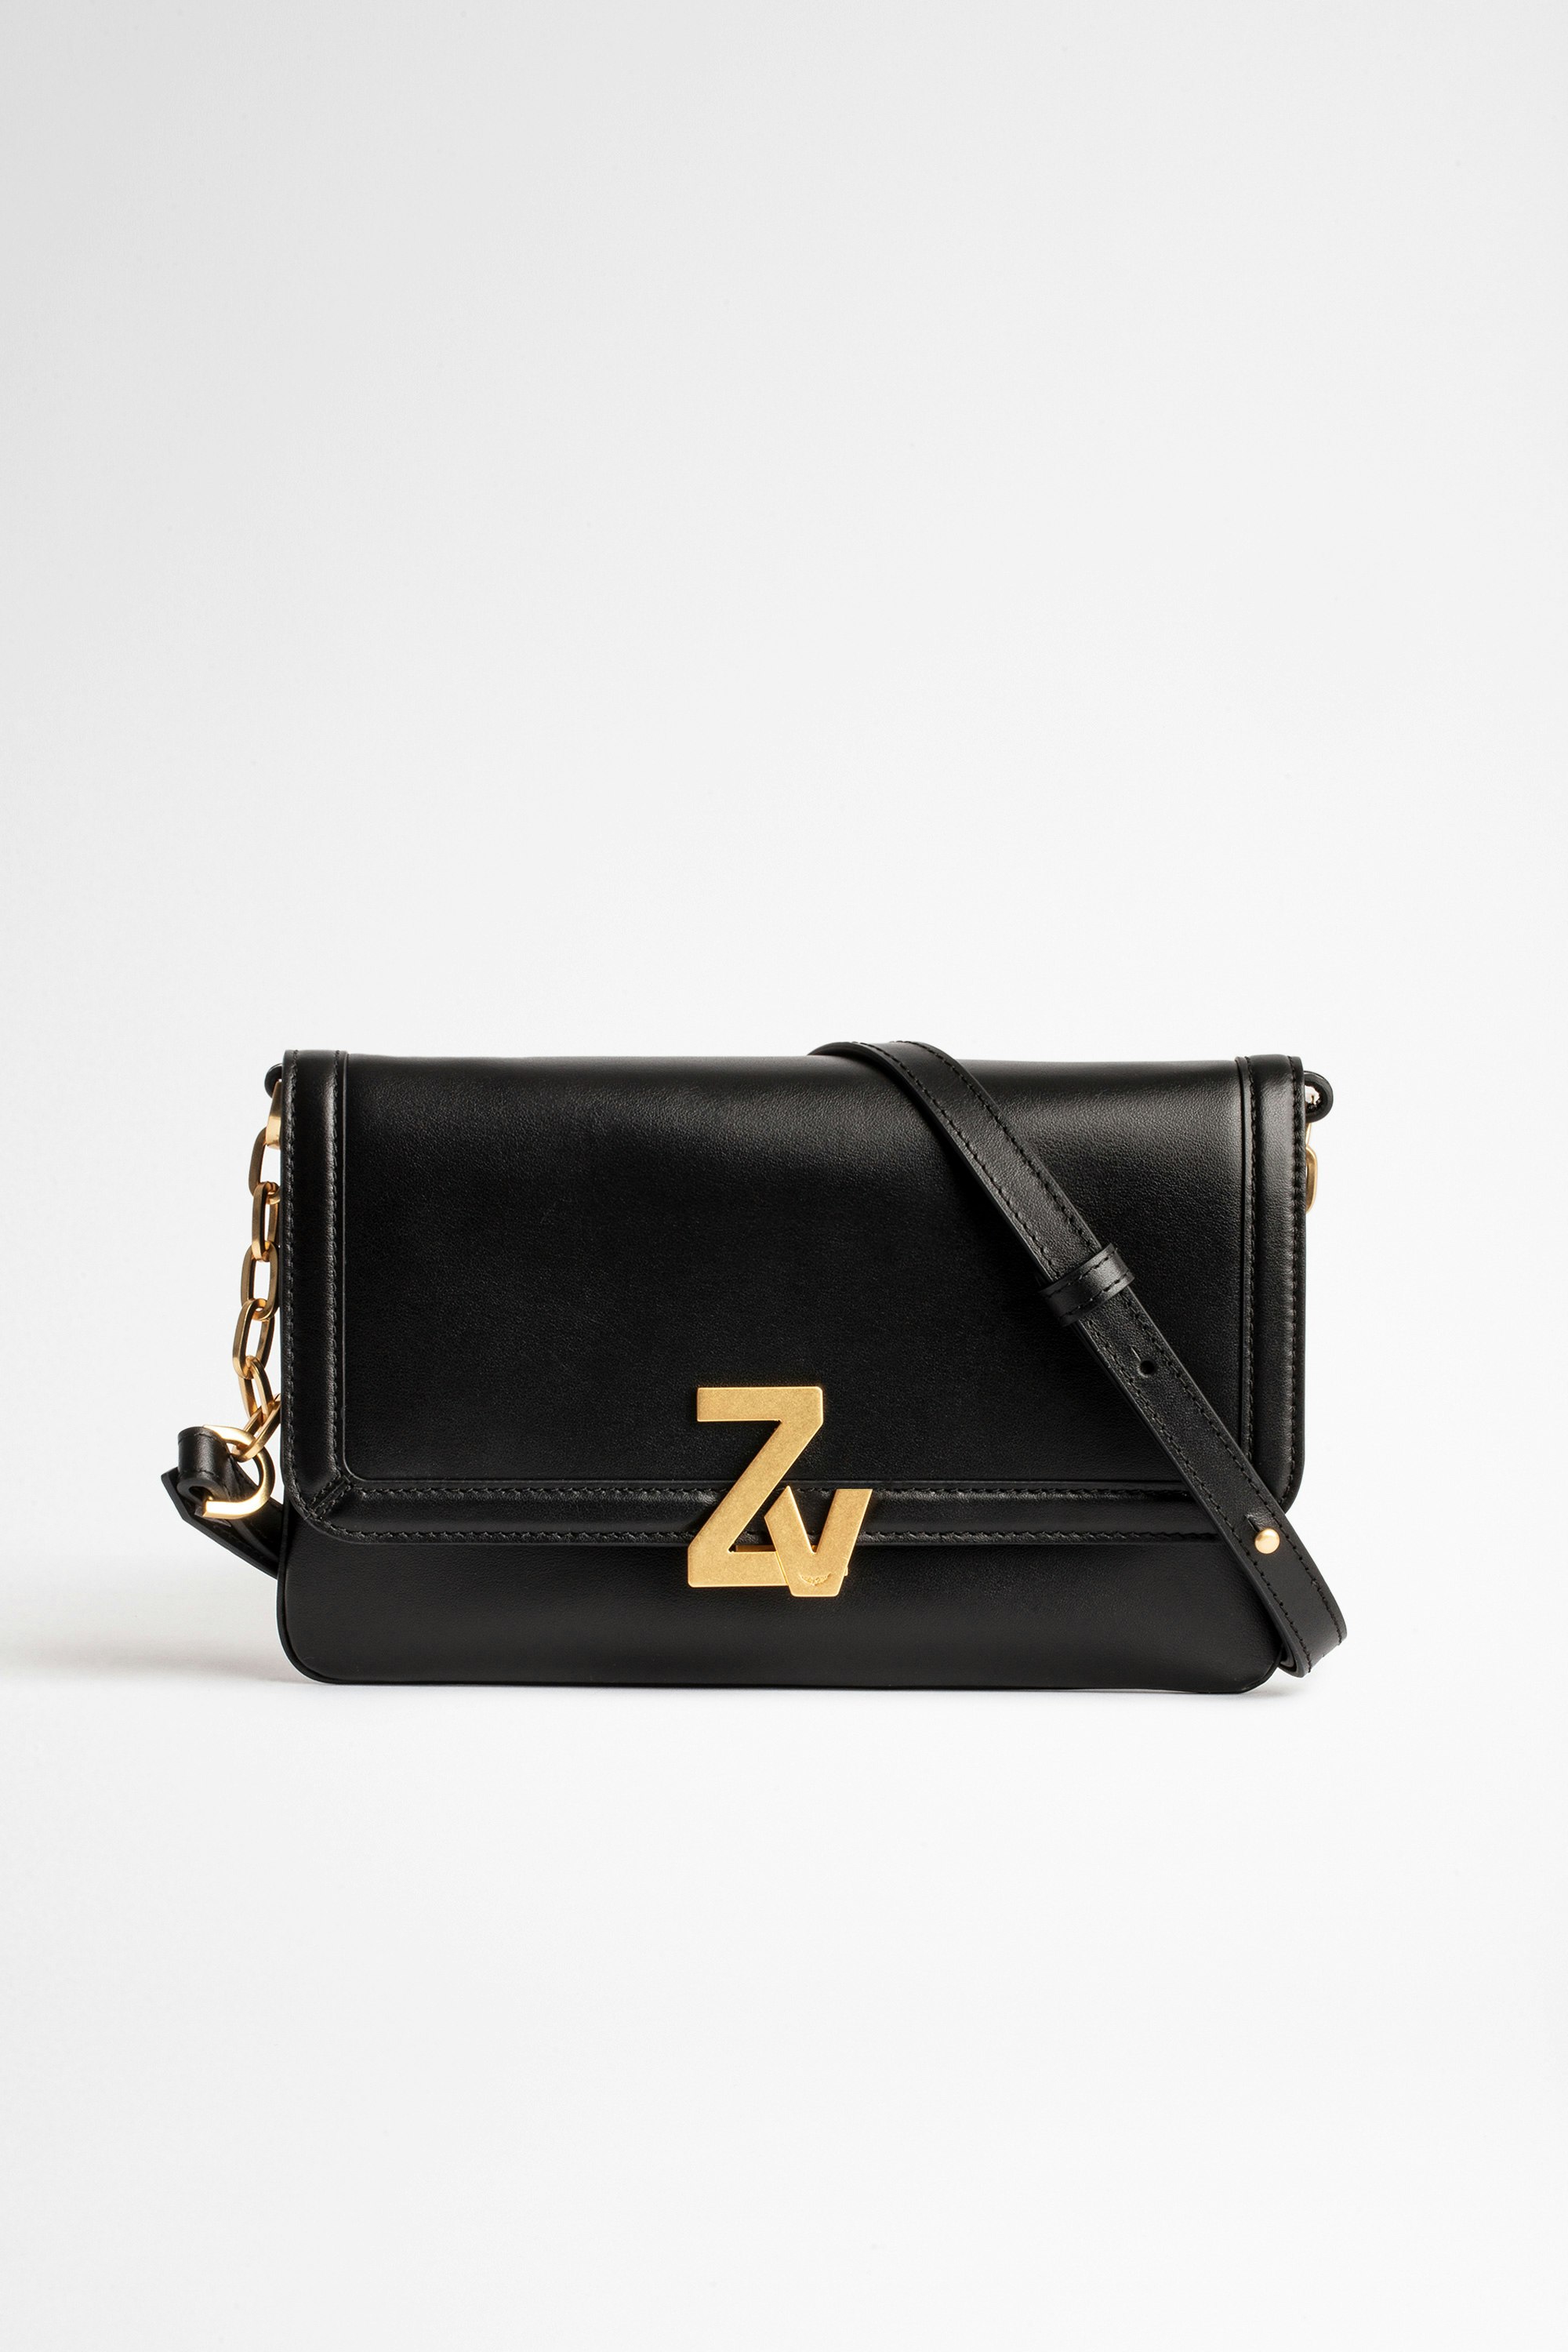 ZV Initiale La Clutch Bag Women’s smooth leather clutch bag with ZV monogram